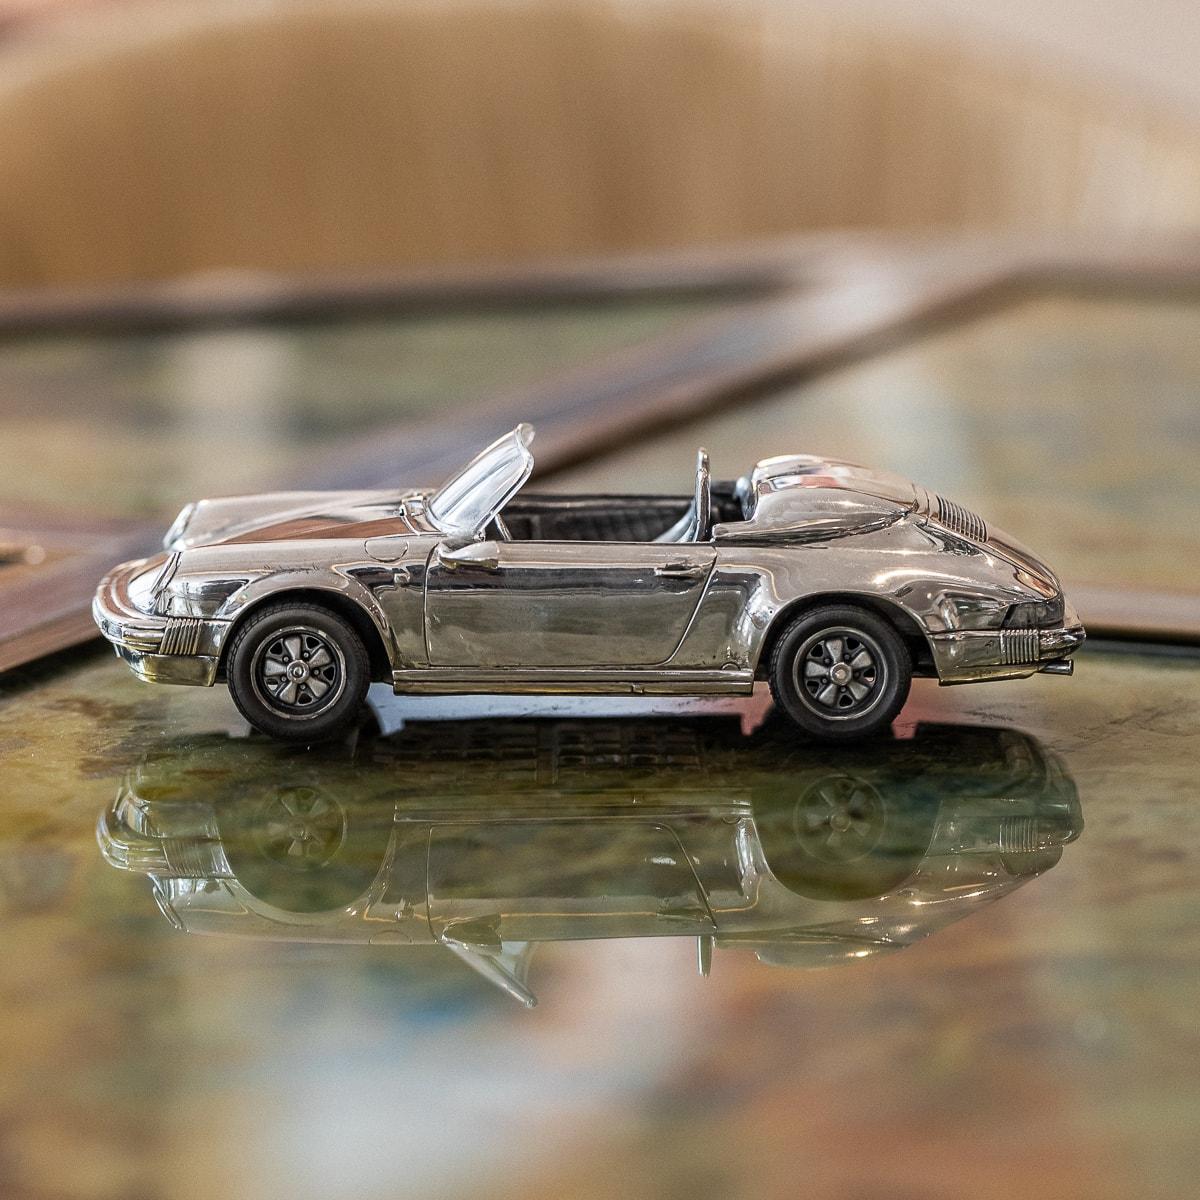 A mid 20th Century solid silver model of a Porsche 911 convertible sports car. This timeless model has wheels fitted with Bridgestone rubber tyres. The exterior is polished to a high shine and internally there is exceptional detail within the